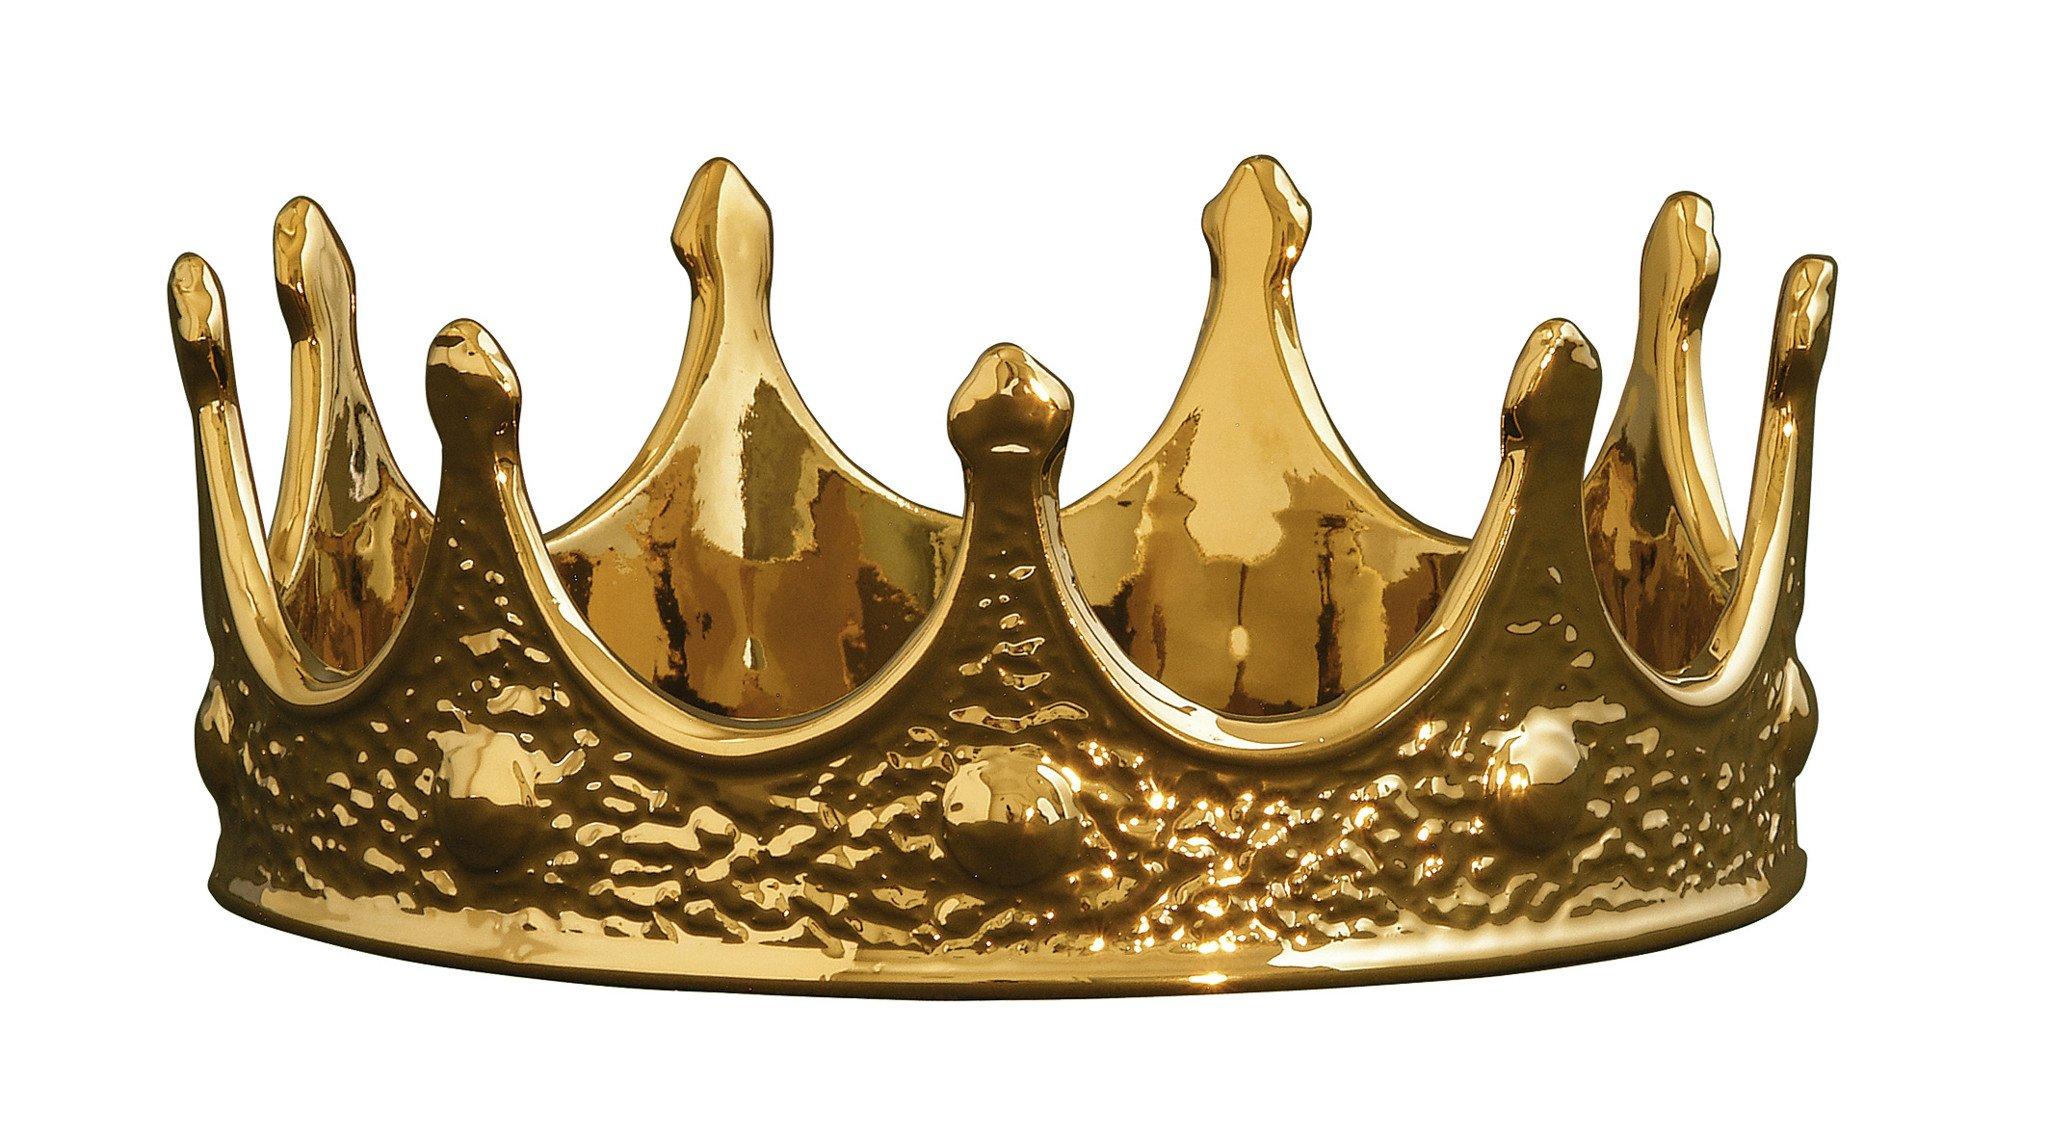 Limited Gold Edition Crown design